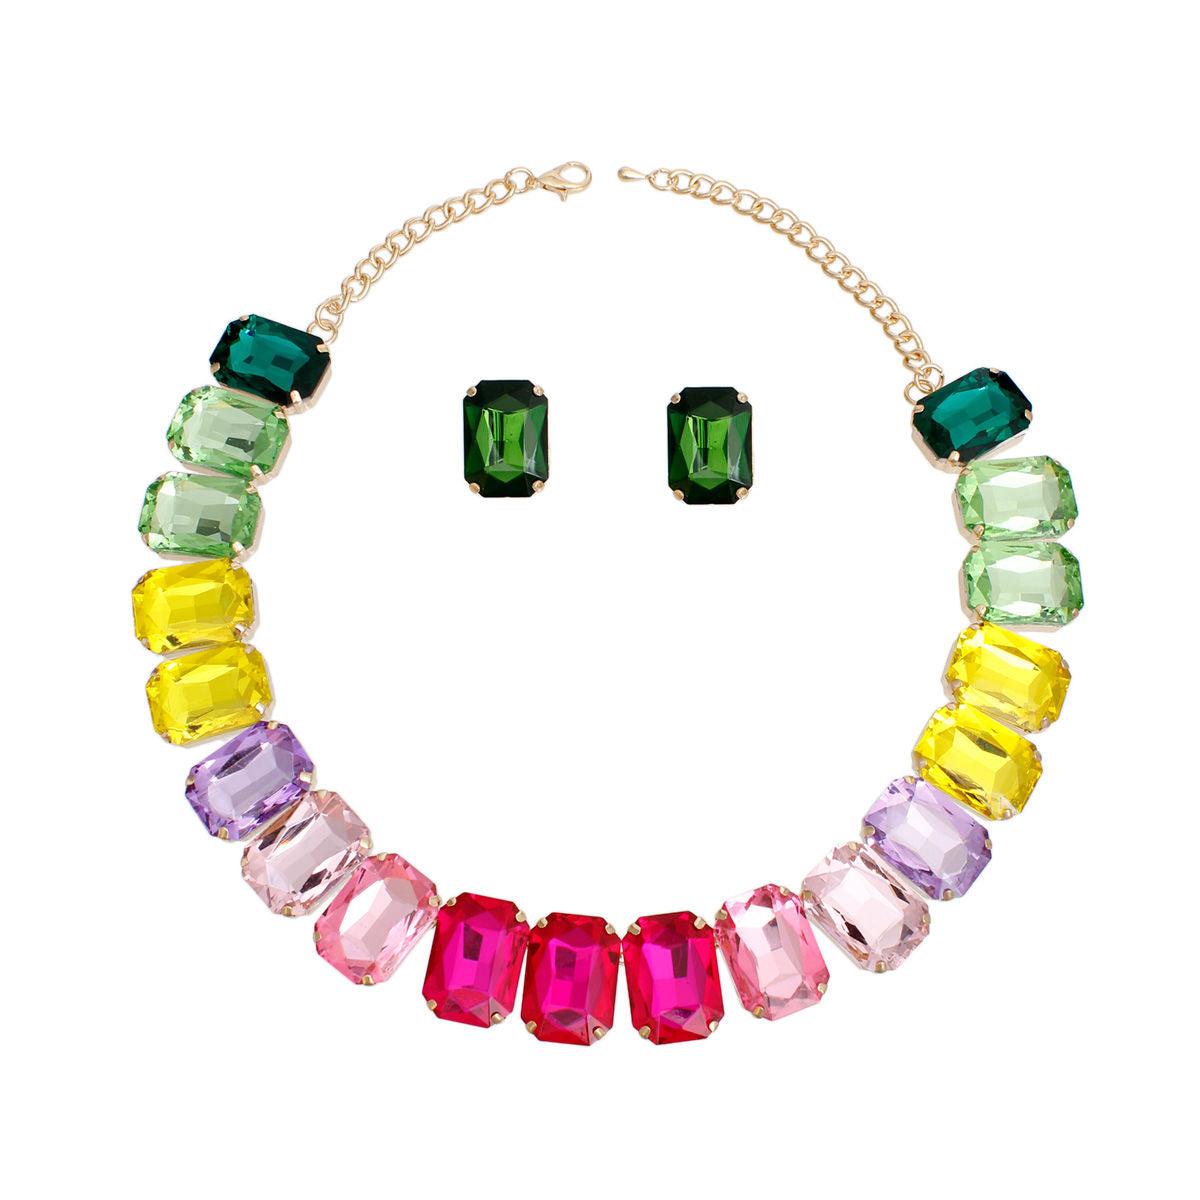 files/captivating-multicolor-necklace-set-define-sophisticated-style-jewelry-bubble-2.jpg